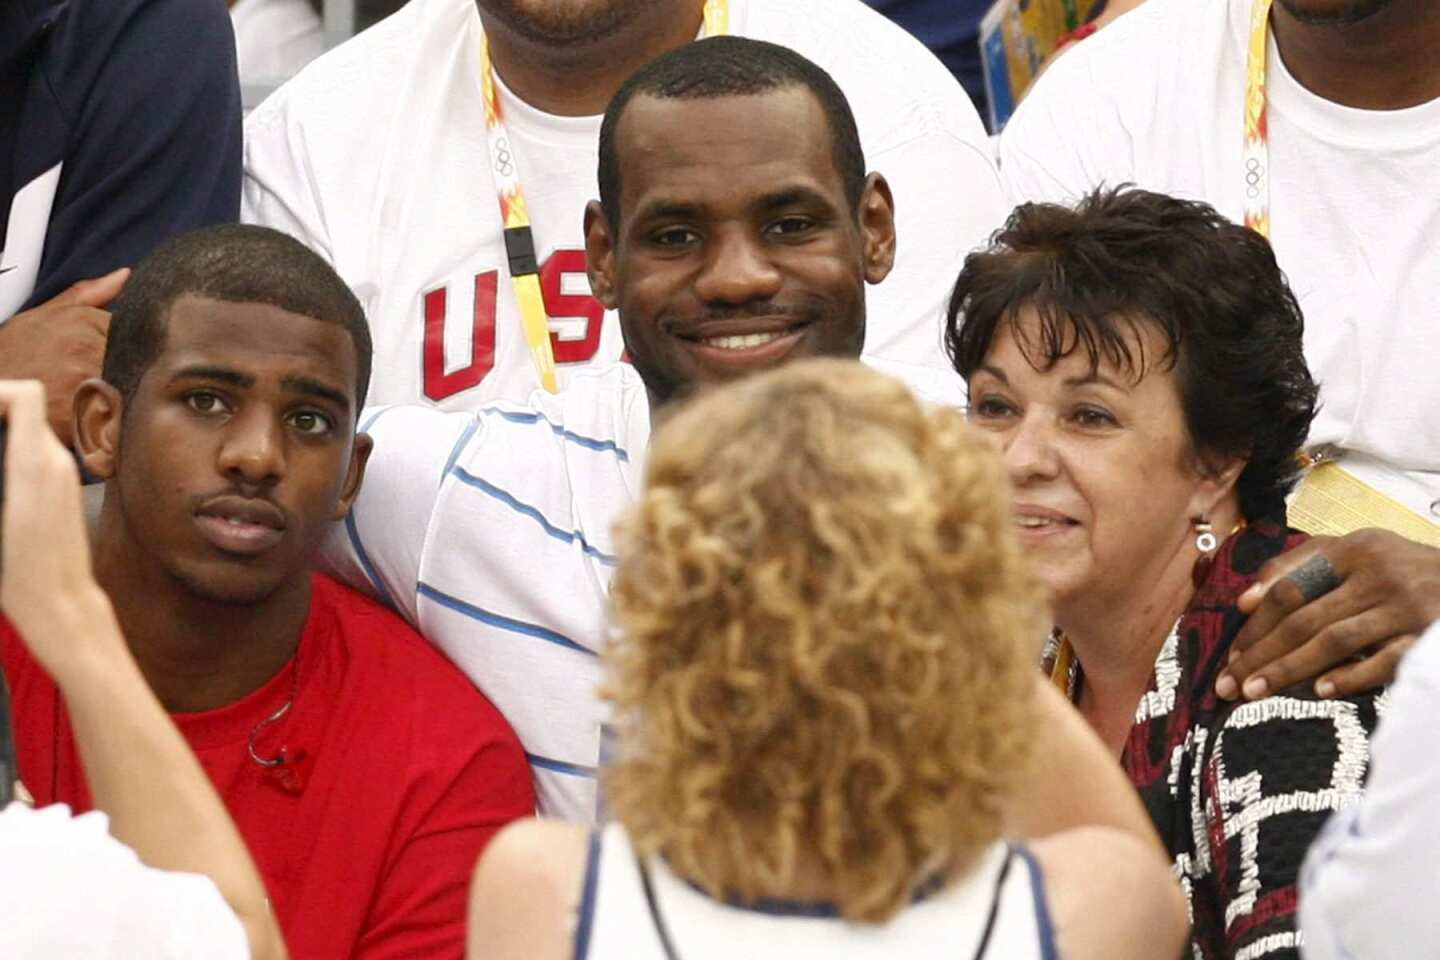 Chris Paul hangs out with LeBron James